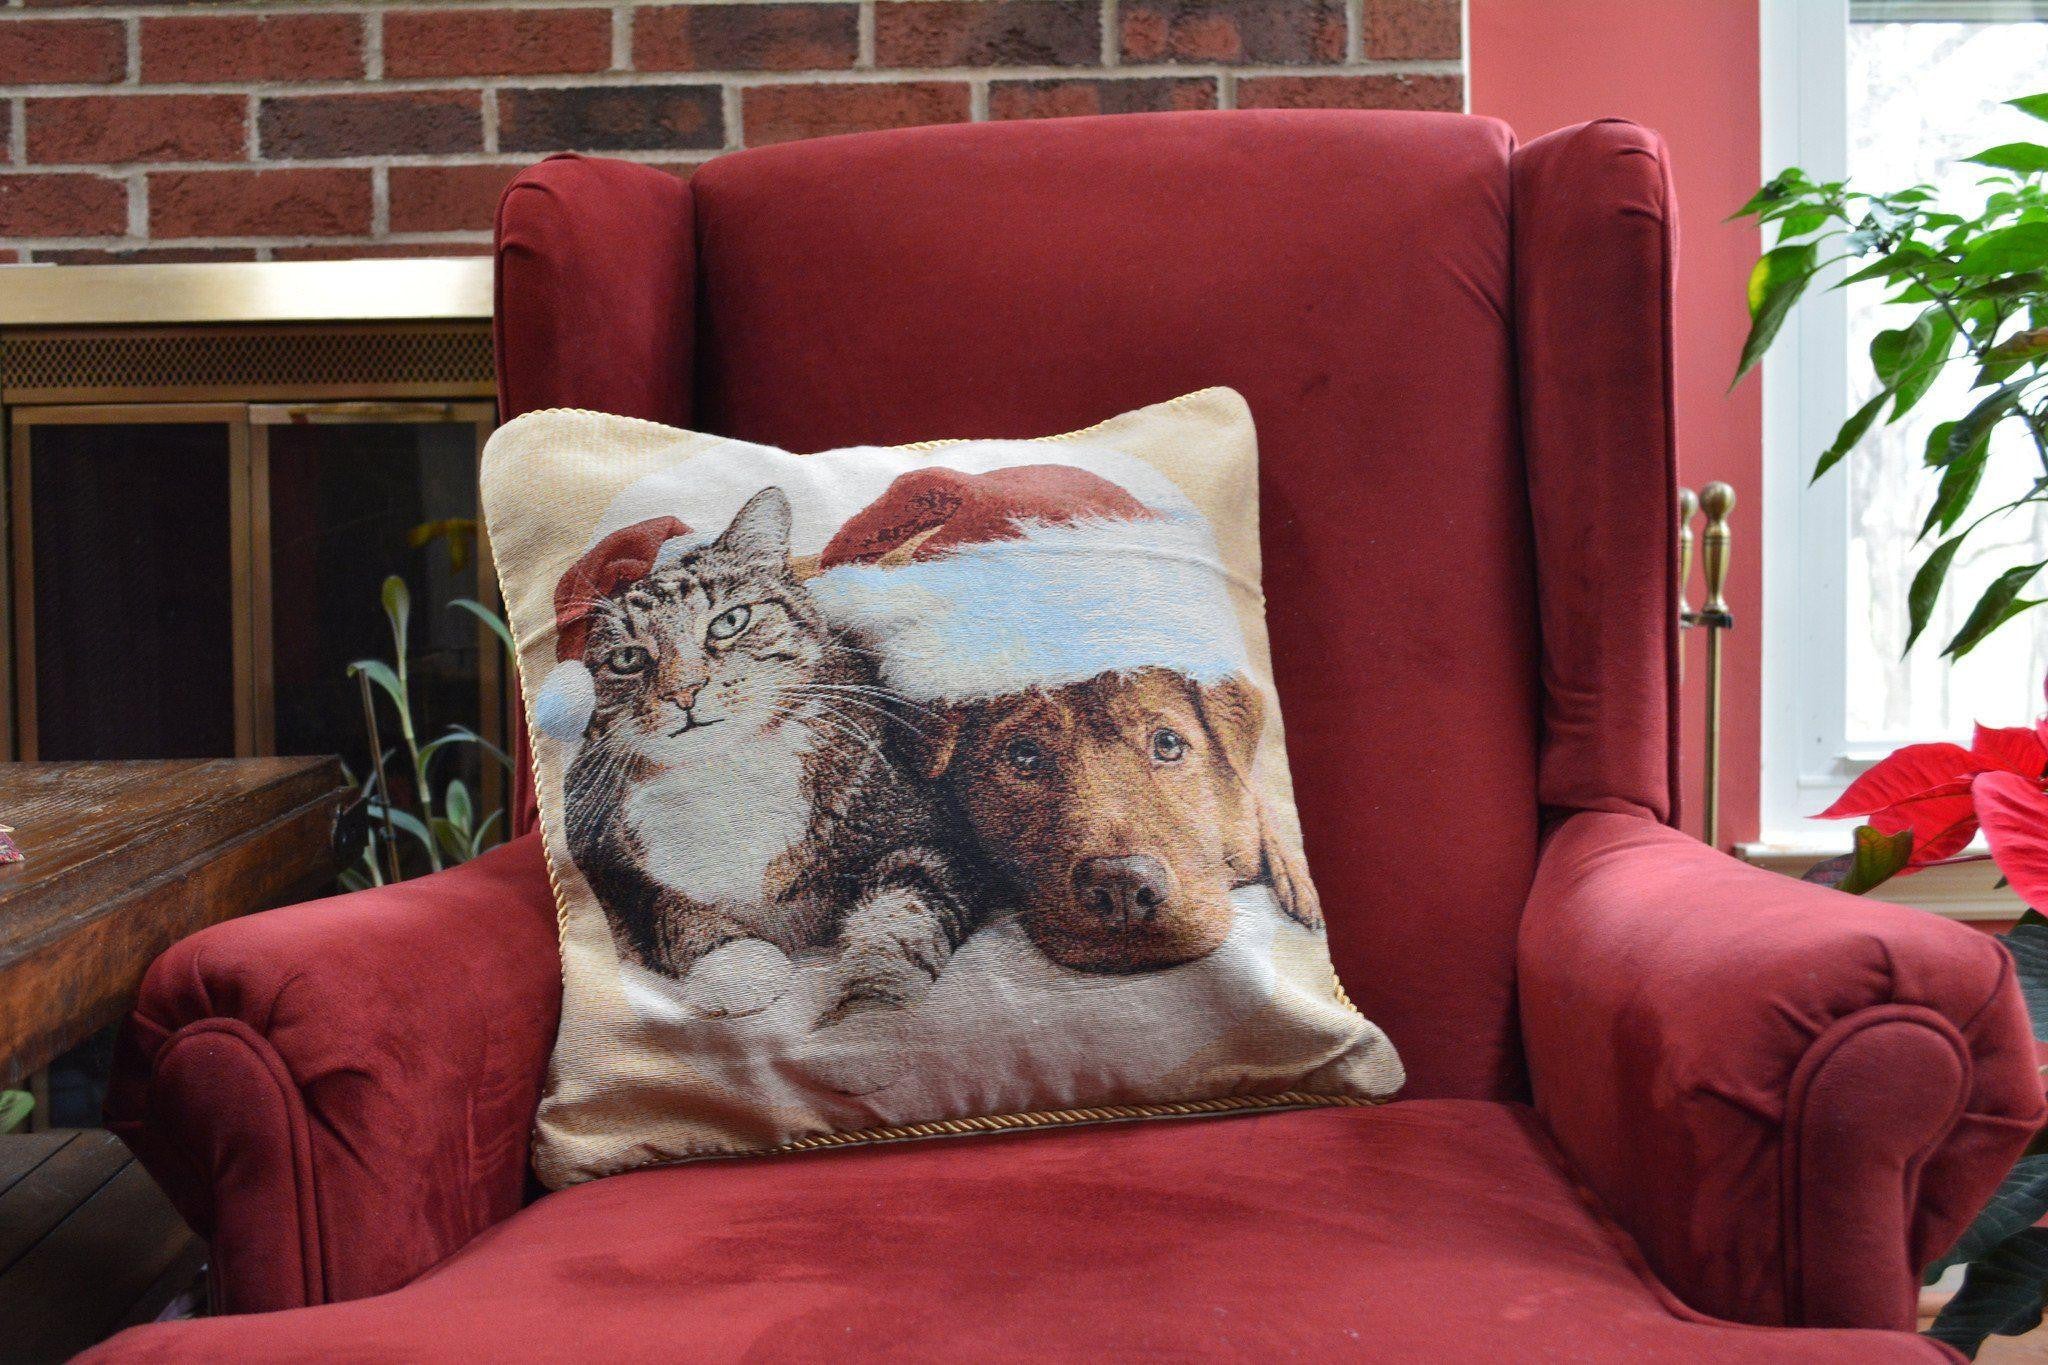 Tache Best Friend Pets Dog and Cat Christmas Tapestry Woven Throw Pillow Cover (16461) - Tache Home Fashion